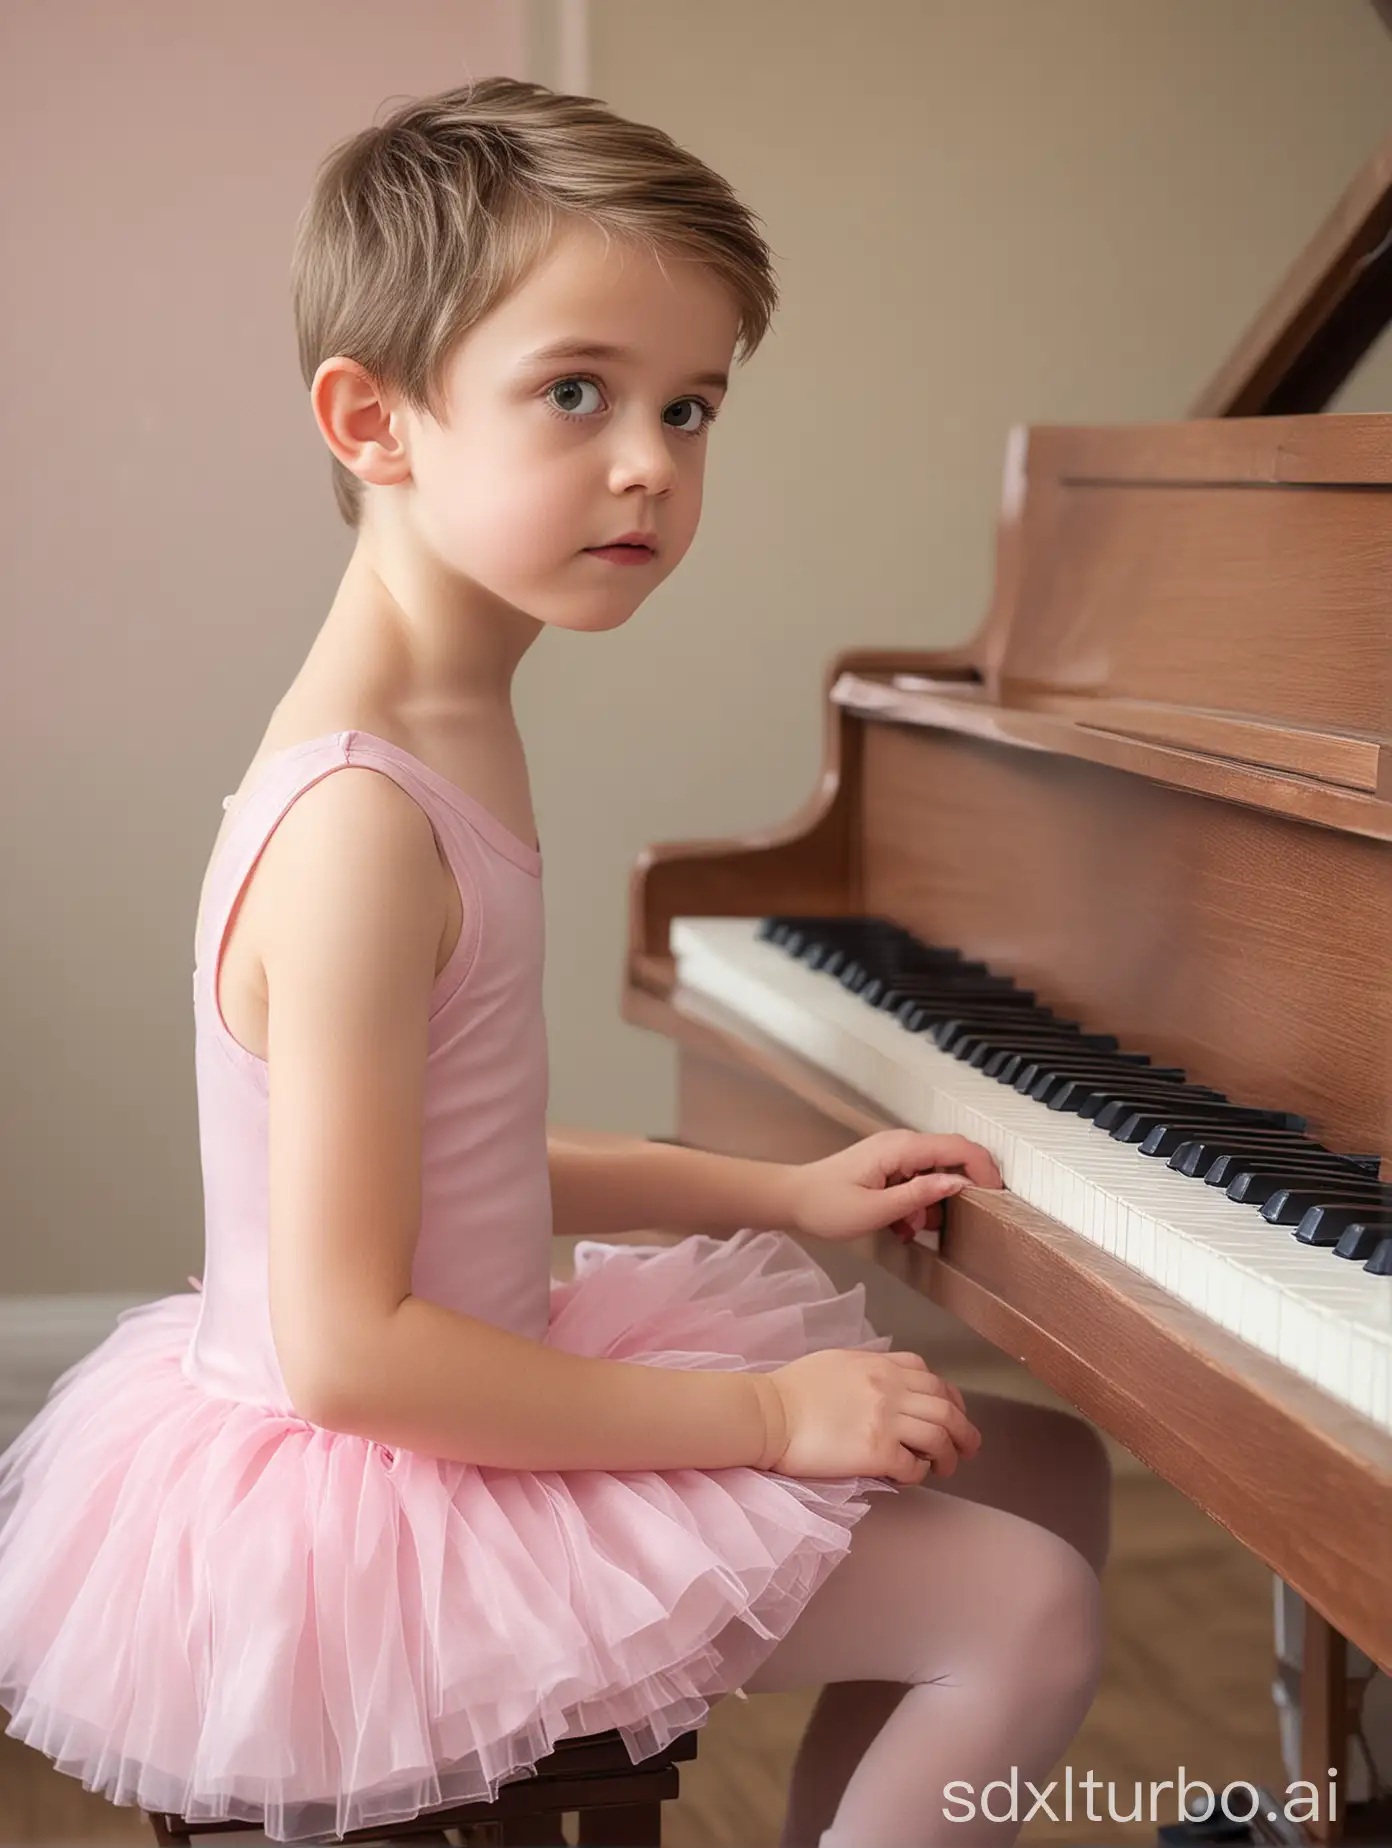 Digital photography of a nervously cute boy, forced to sit in a pink ballet dress and play the piano, a white boy, with a cute face (gender role reversal)